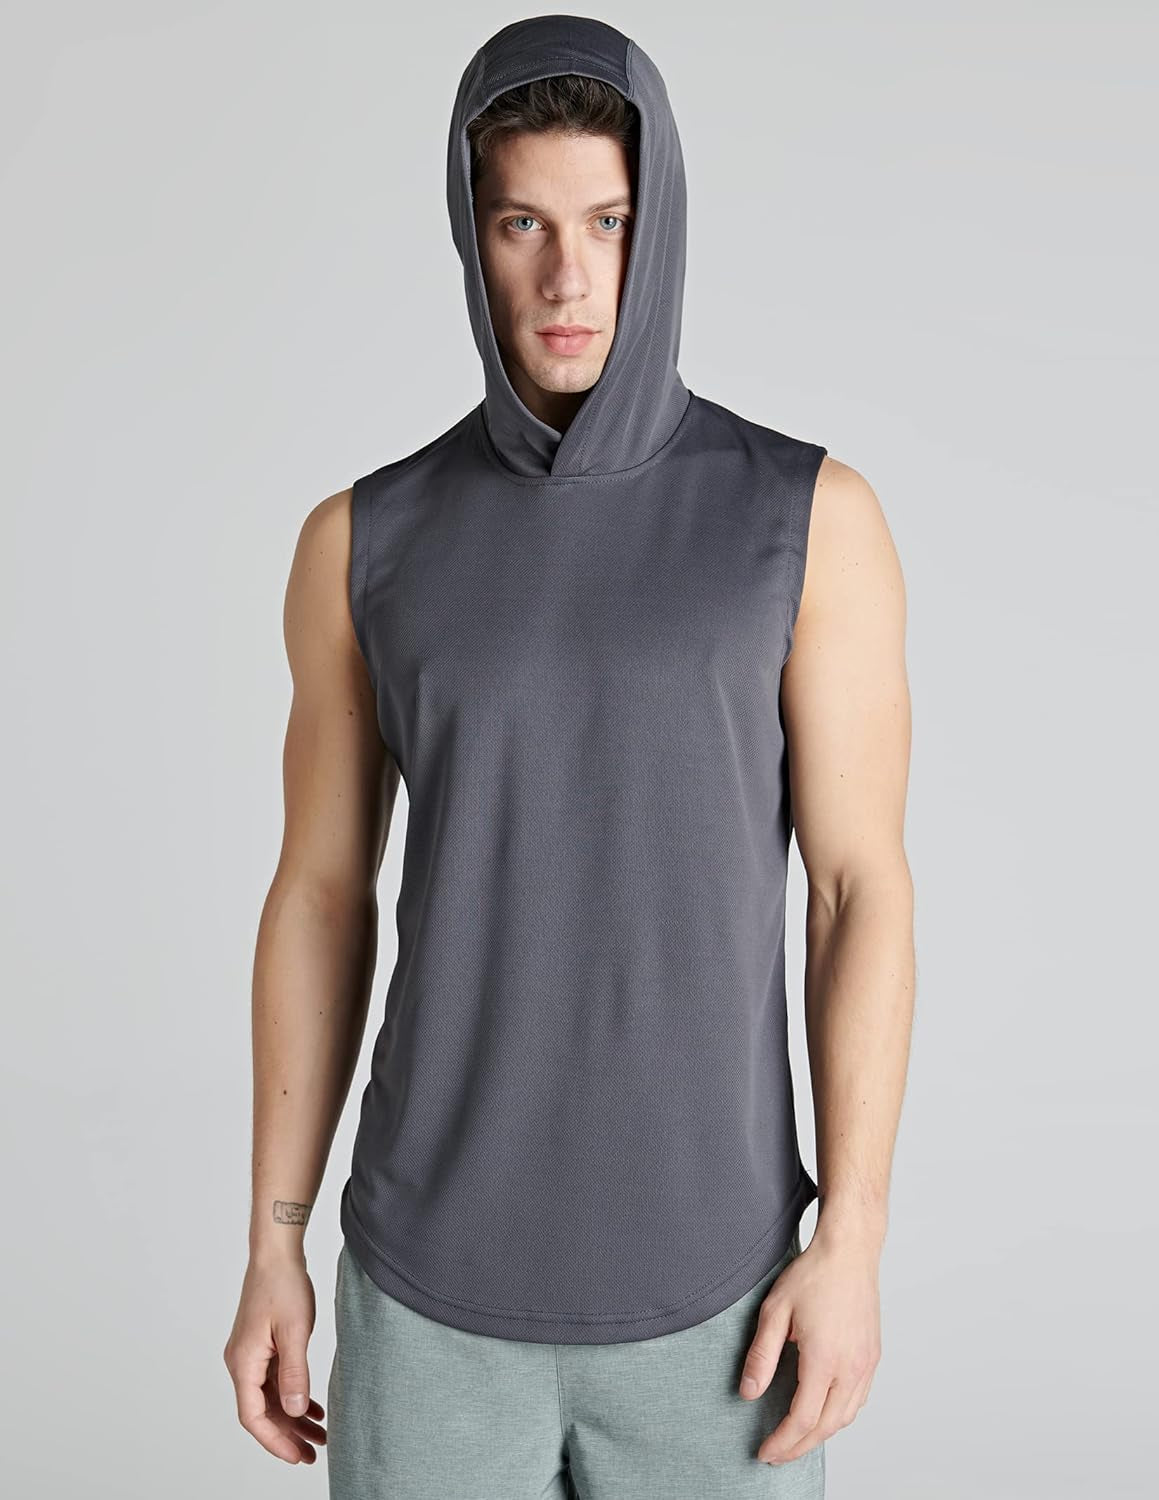 3-Pack Sleeveless Gym Hoodie for Men Workout Shirts, Muscle Hooded Tank Tops Athletic Apparel